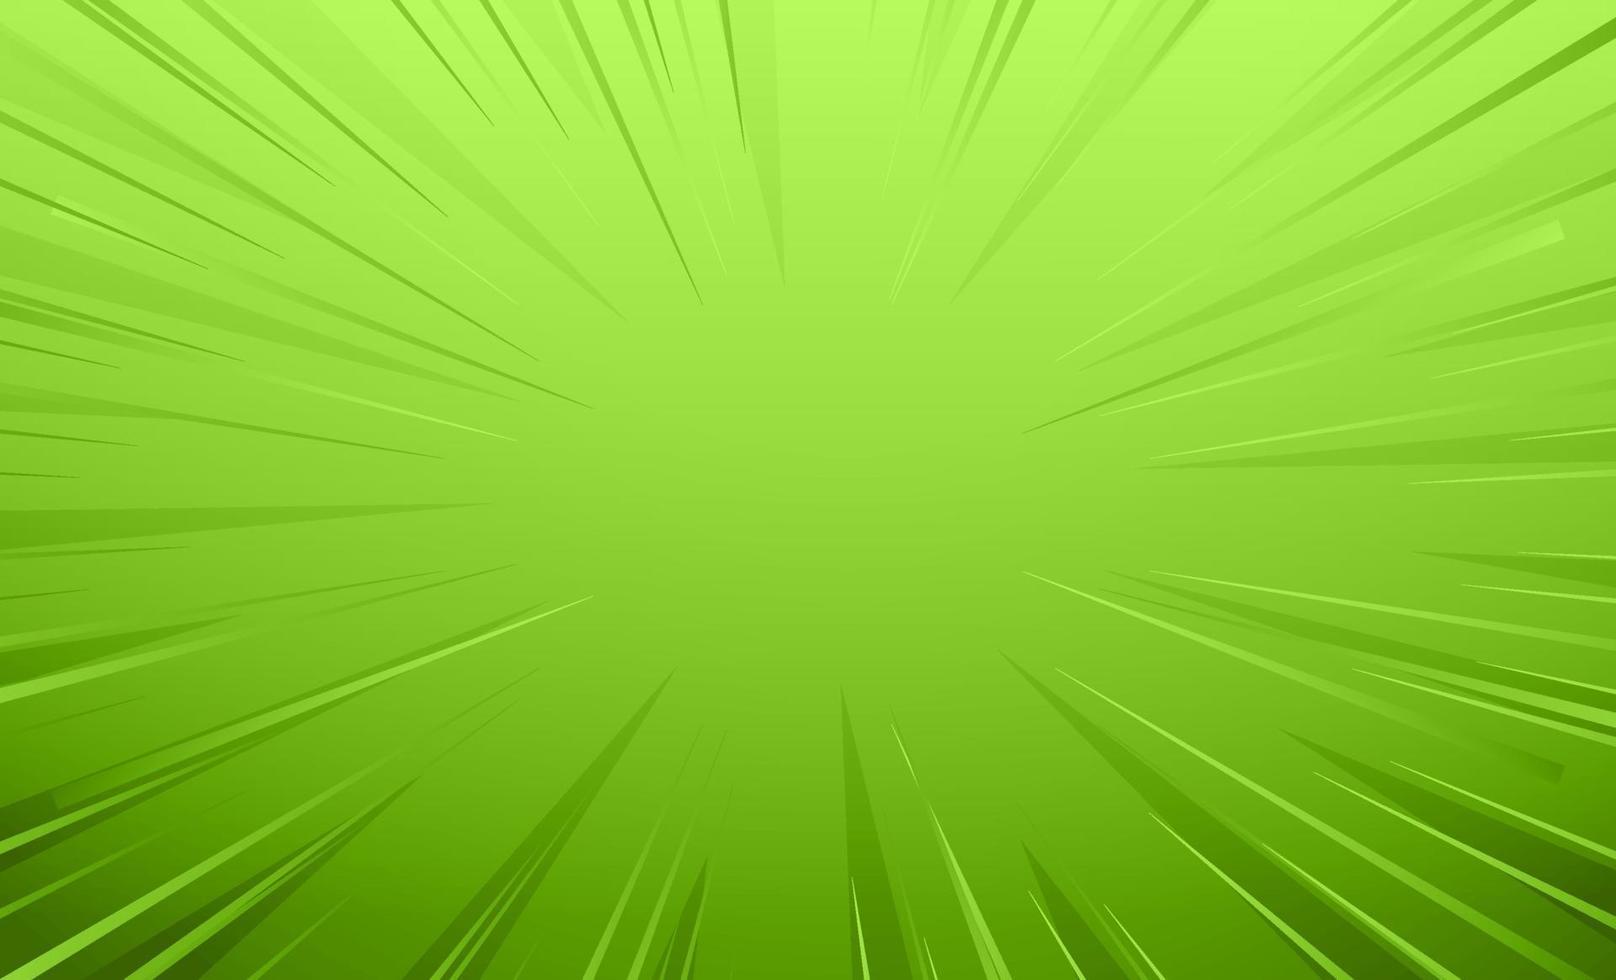 empty green comic style zoom lines background vector